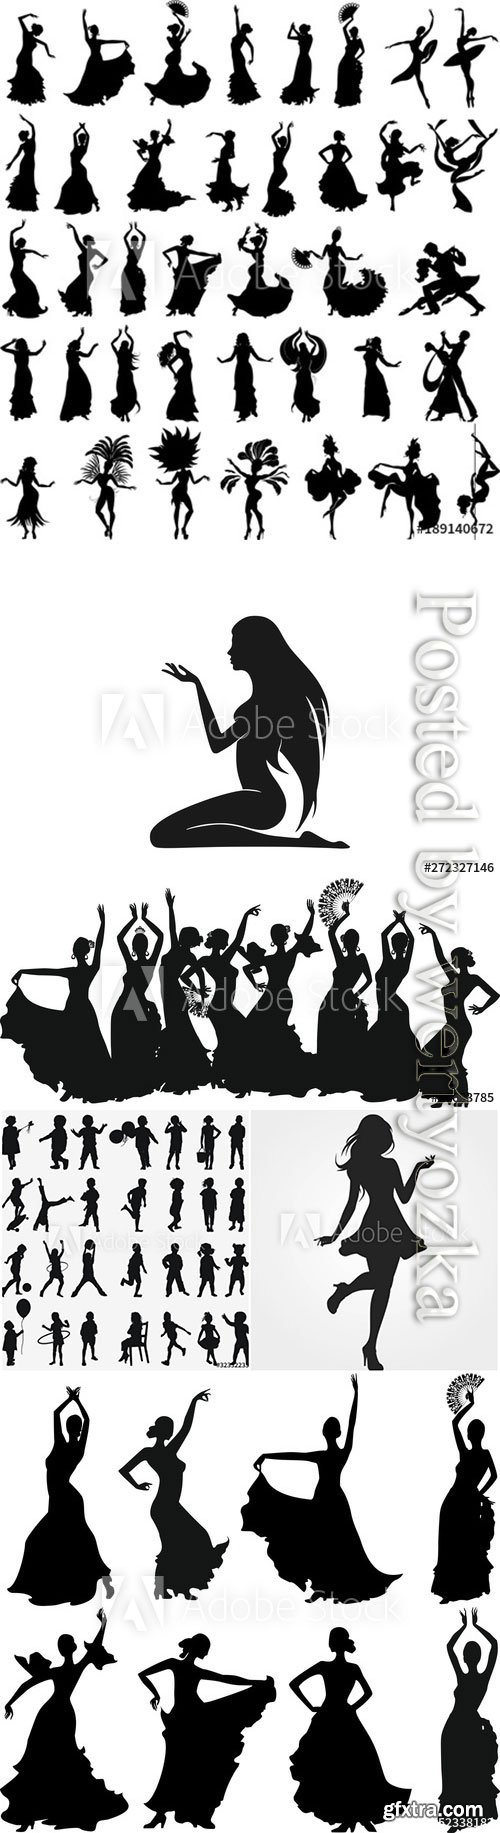 People silhouettes in vector